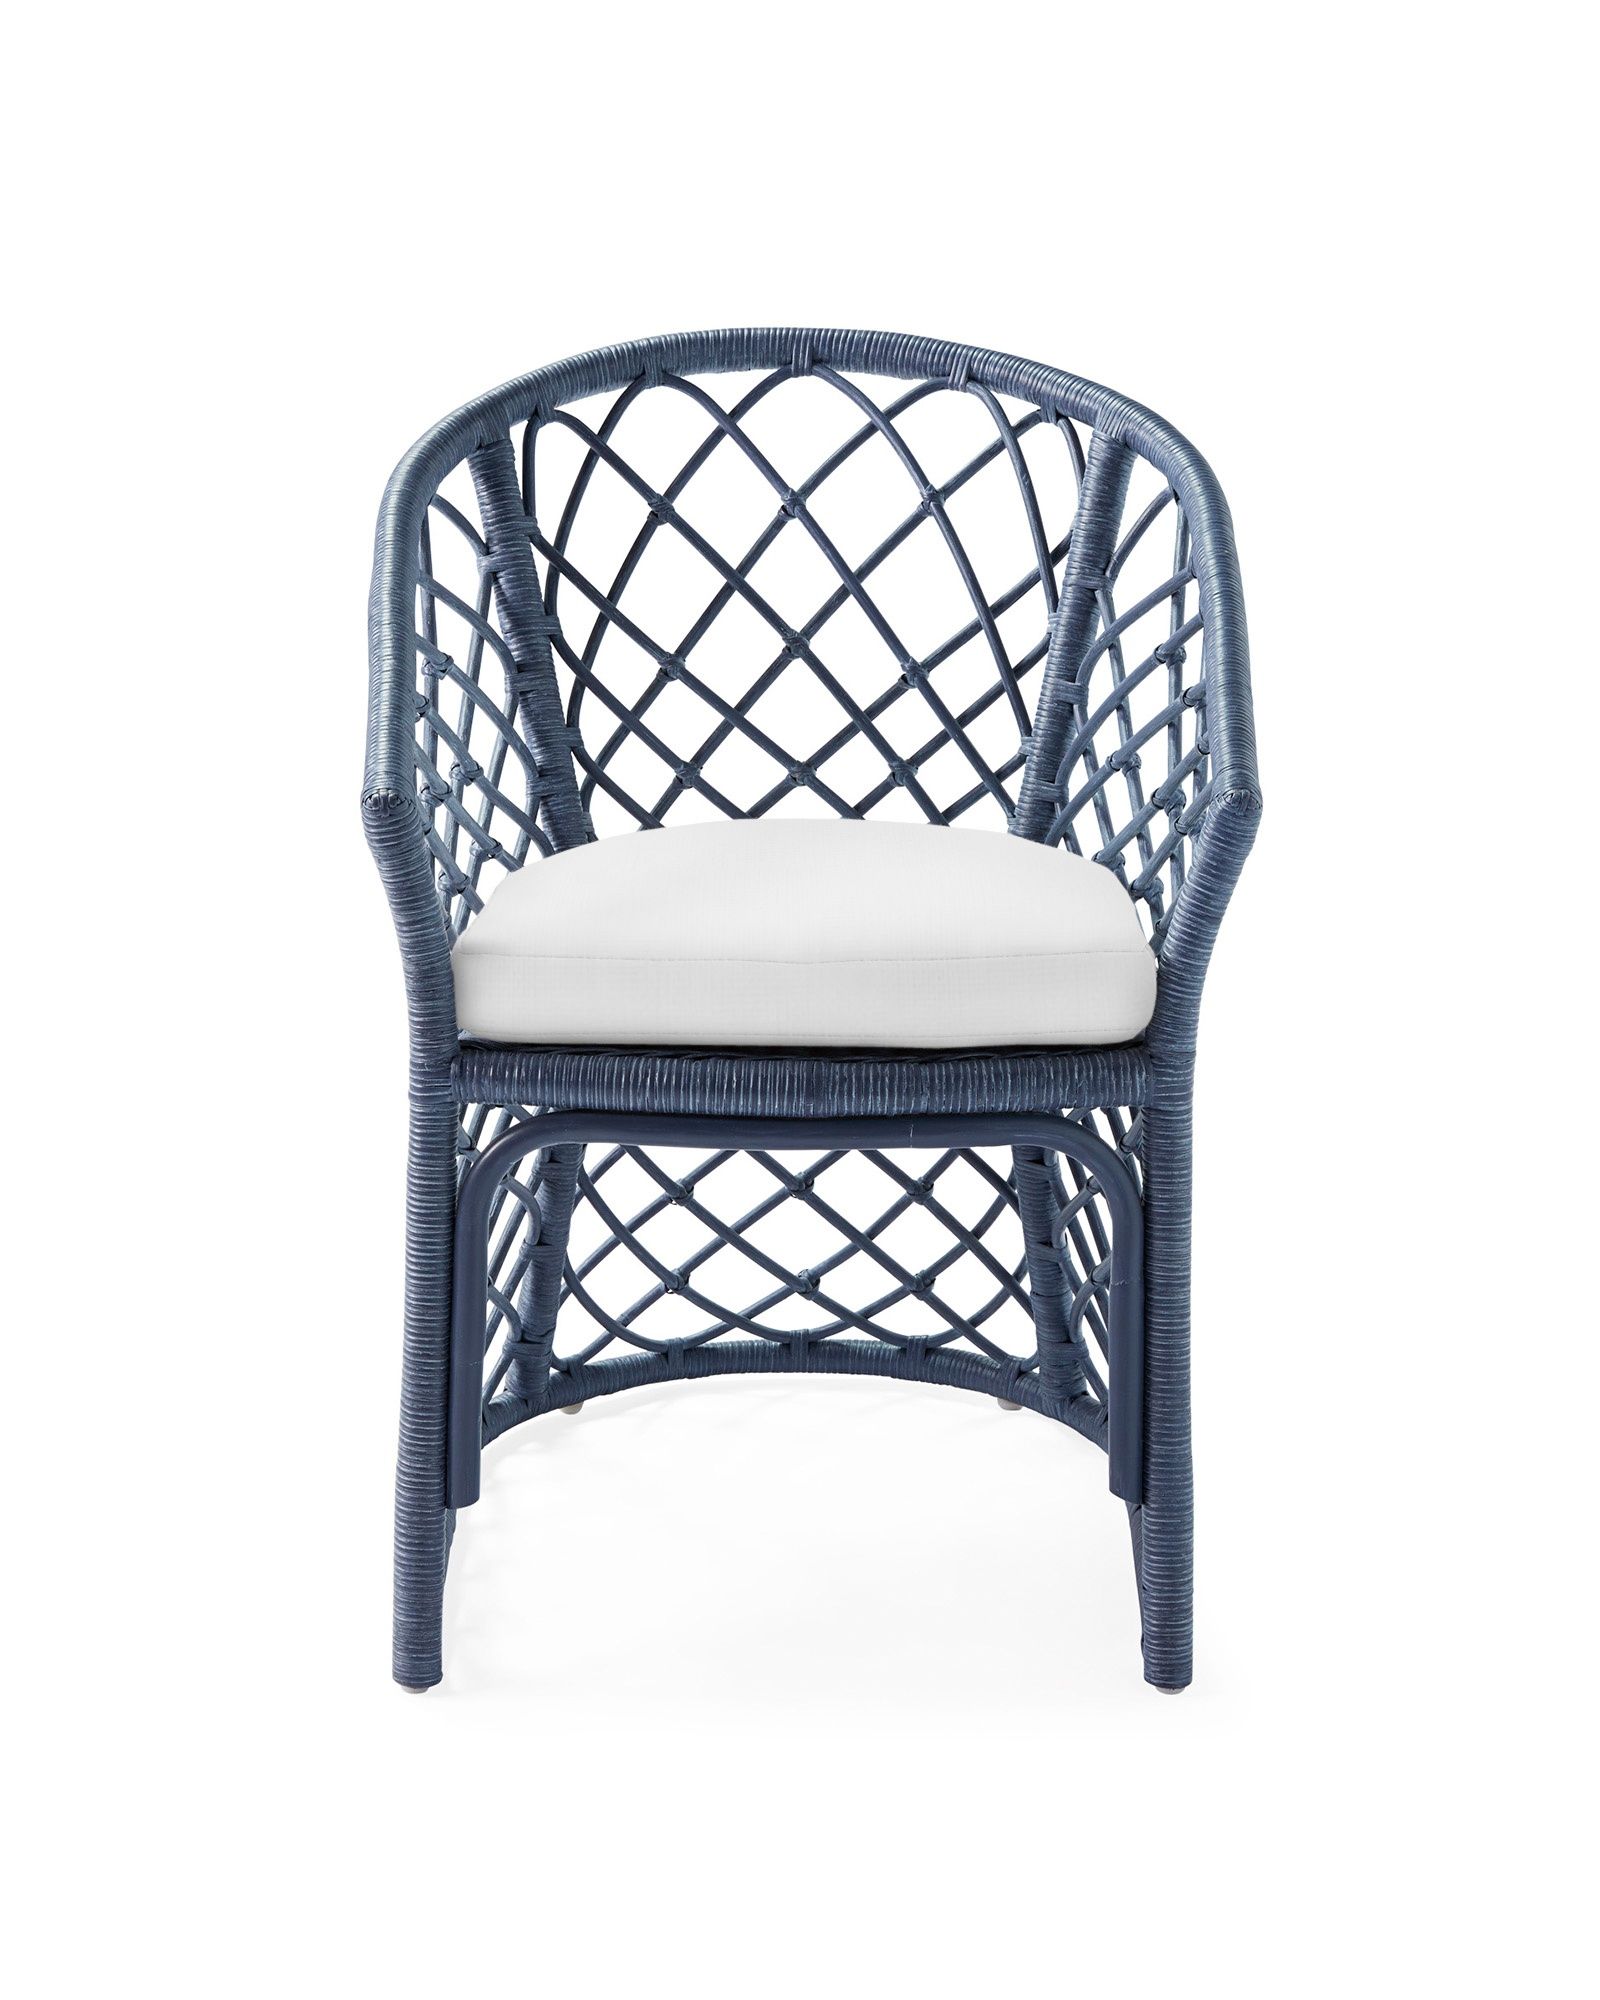 Avalon Dining Chair - Vintage Indigo | Serena and Lily